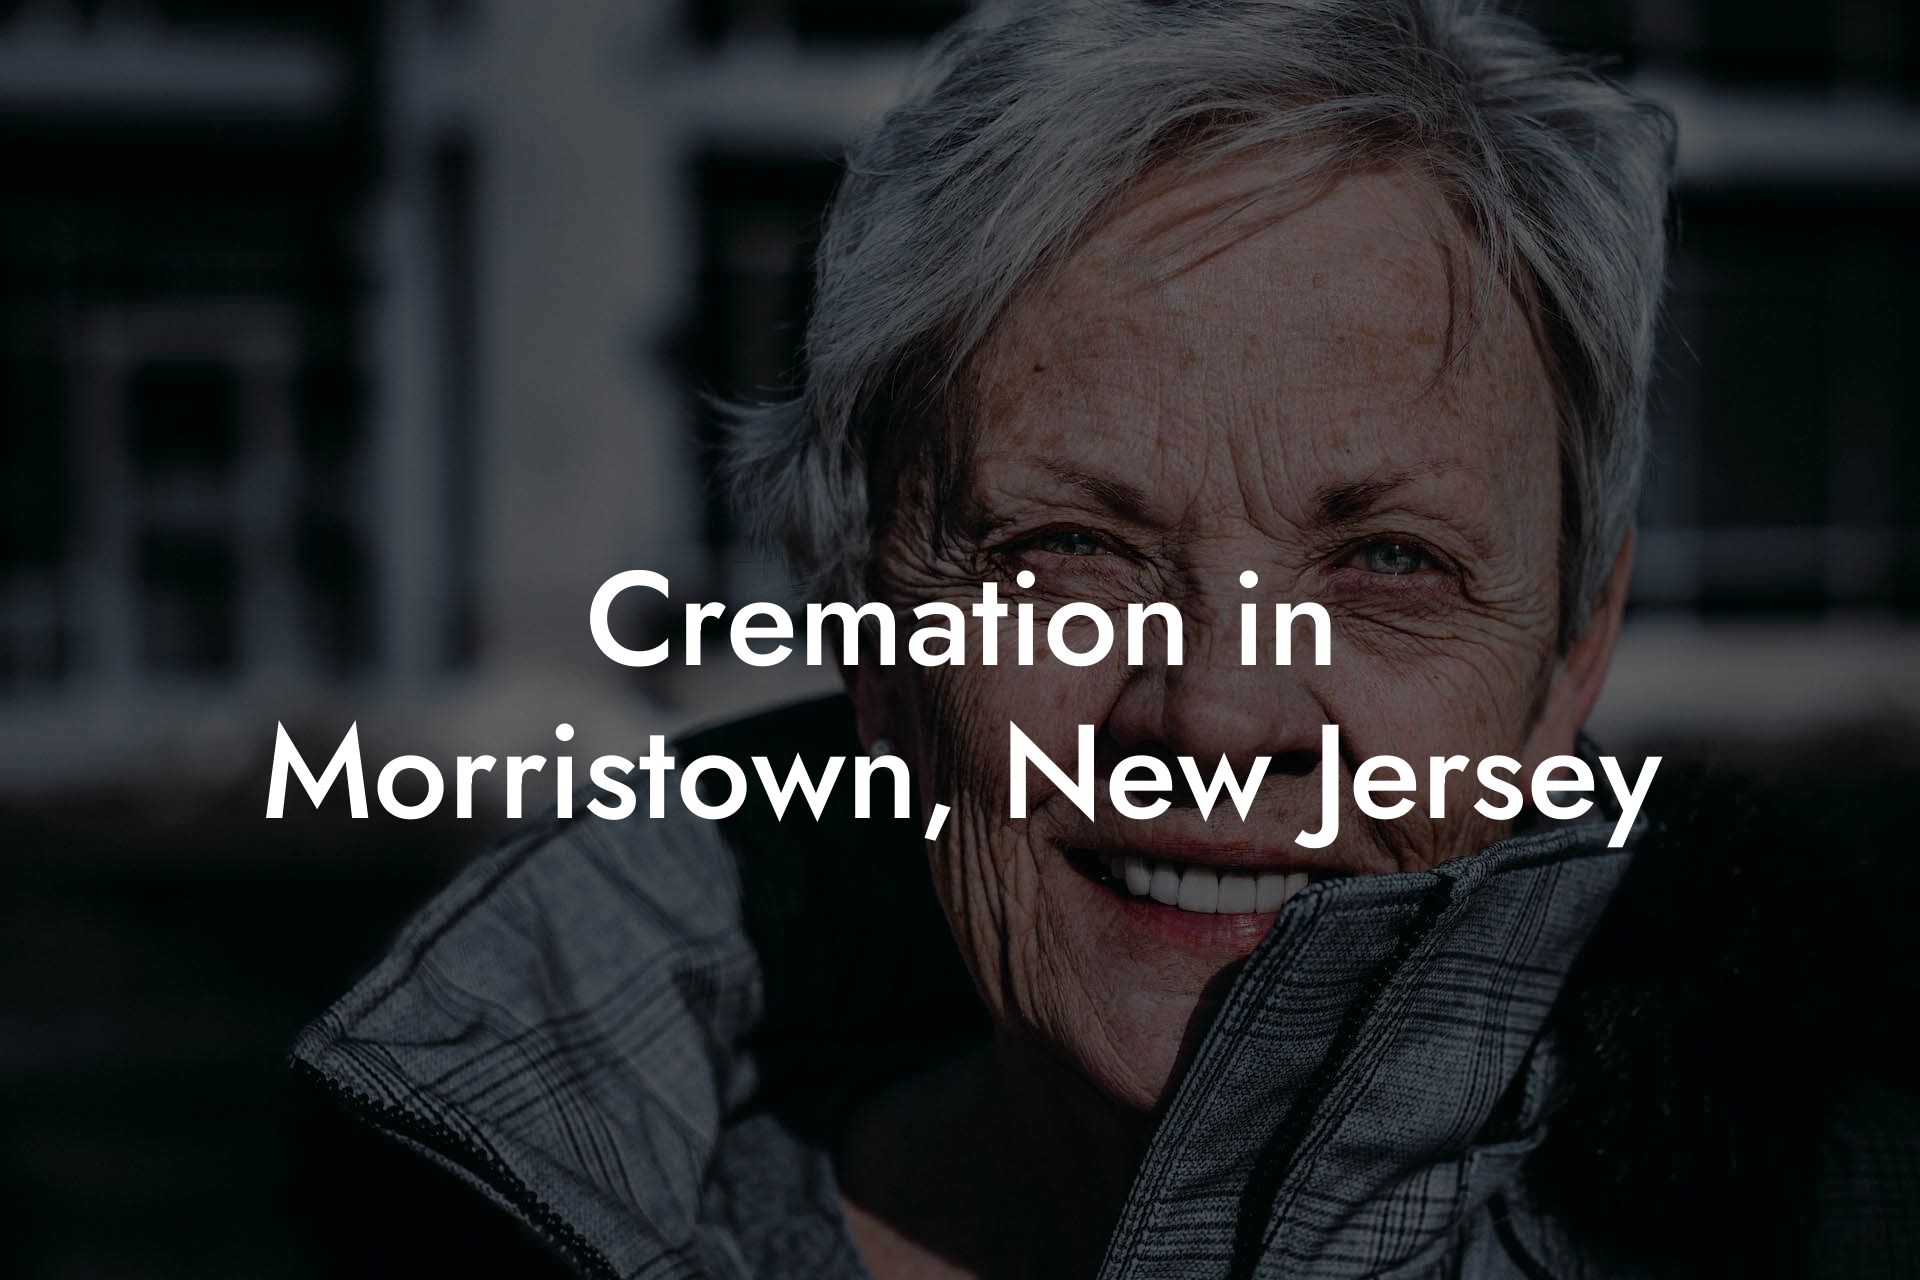 Cremation in Morristown, New Jersey